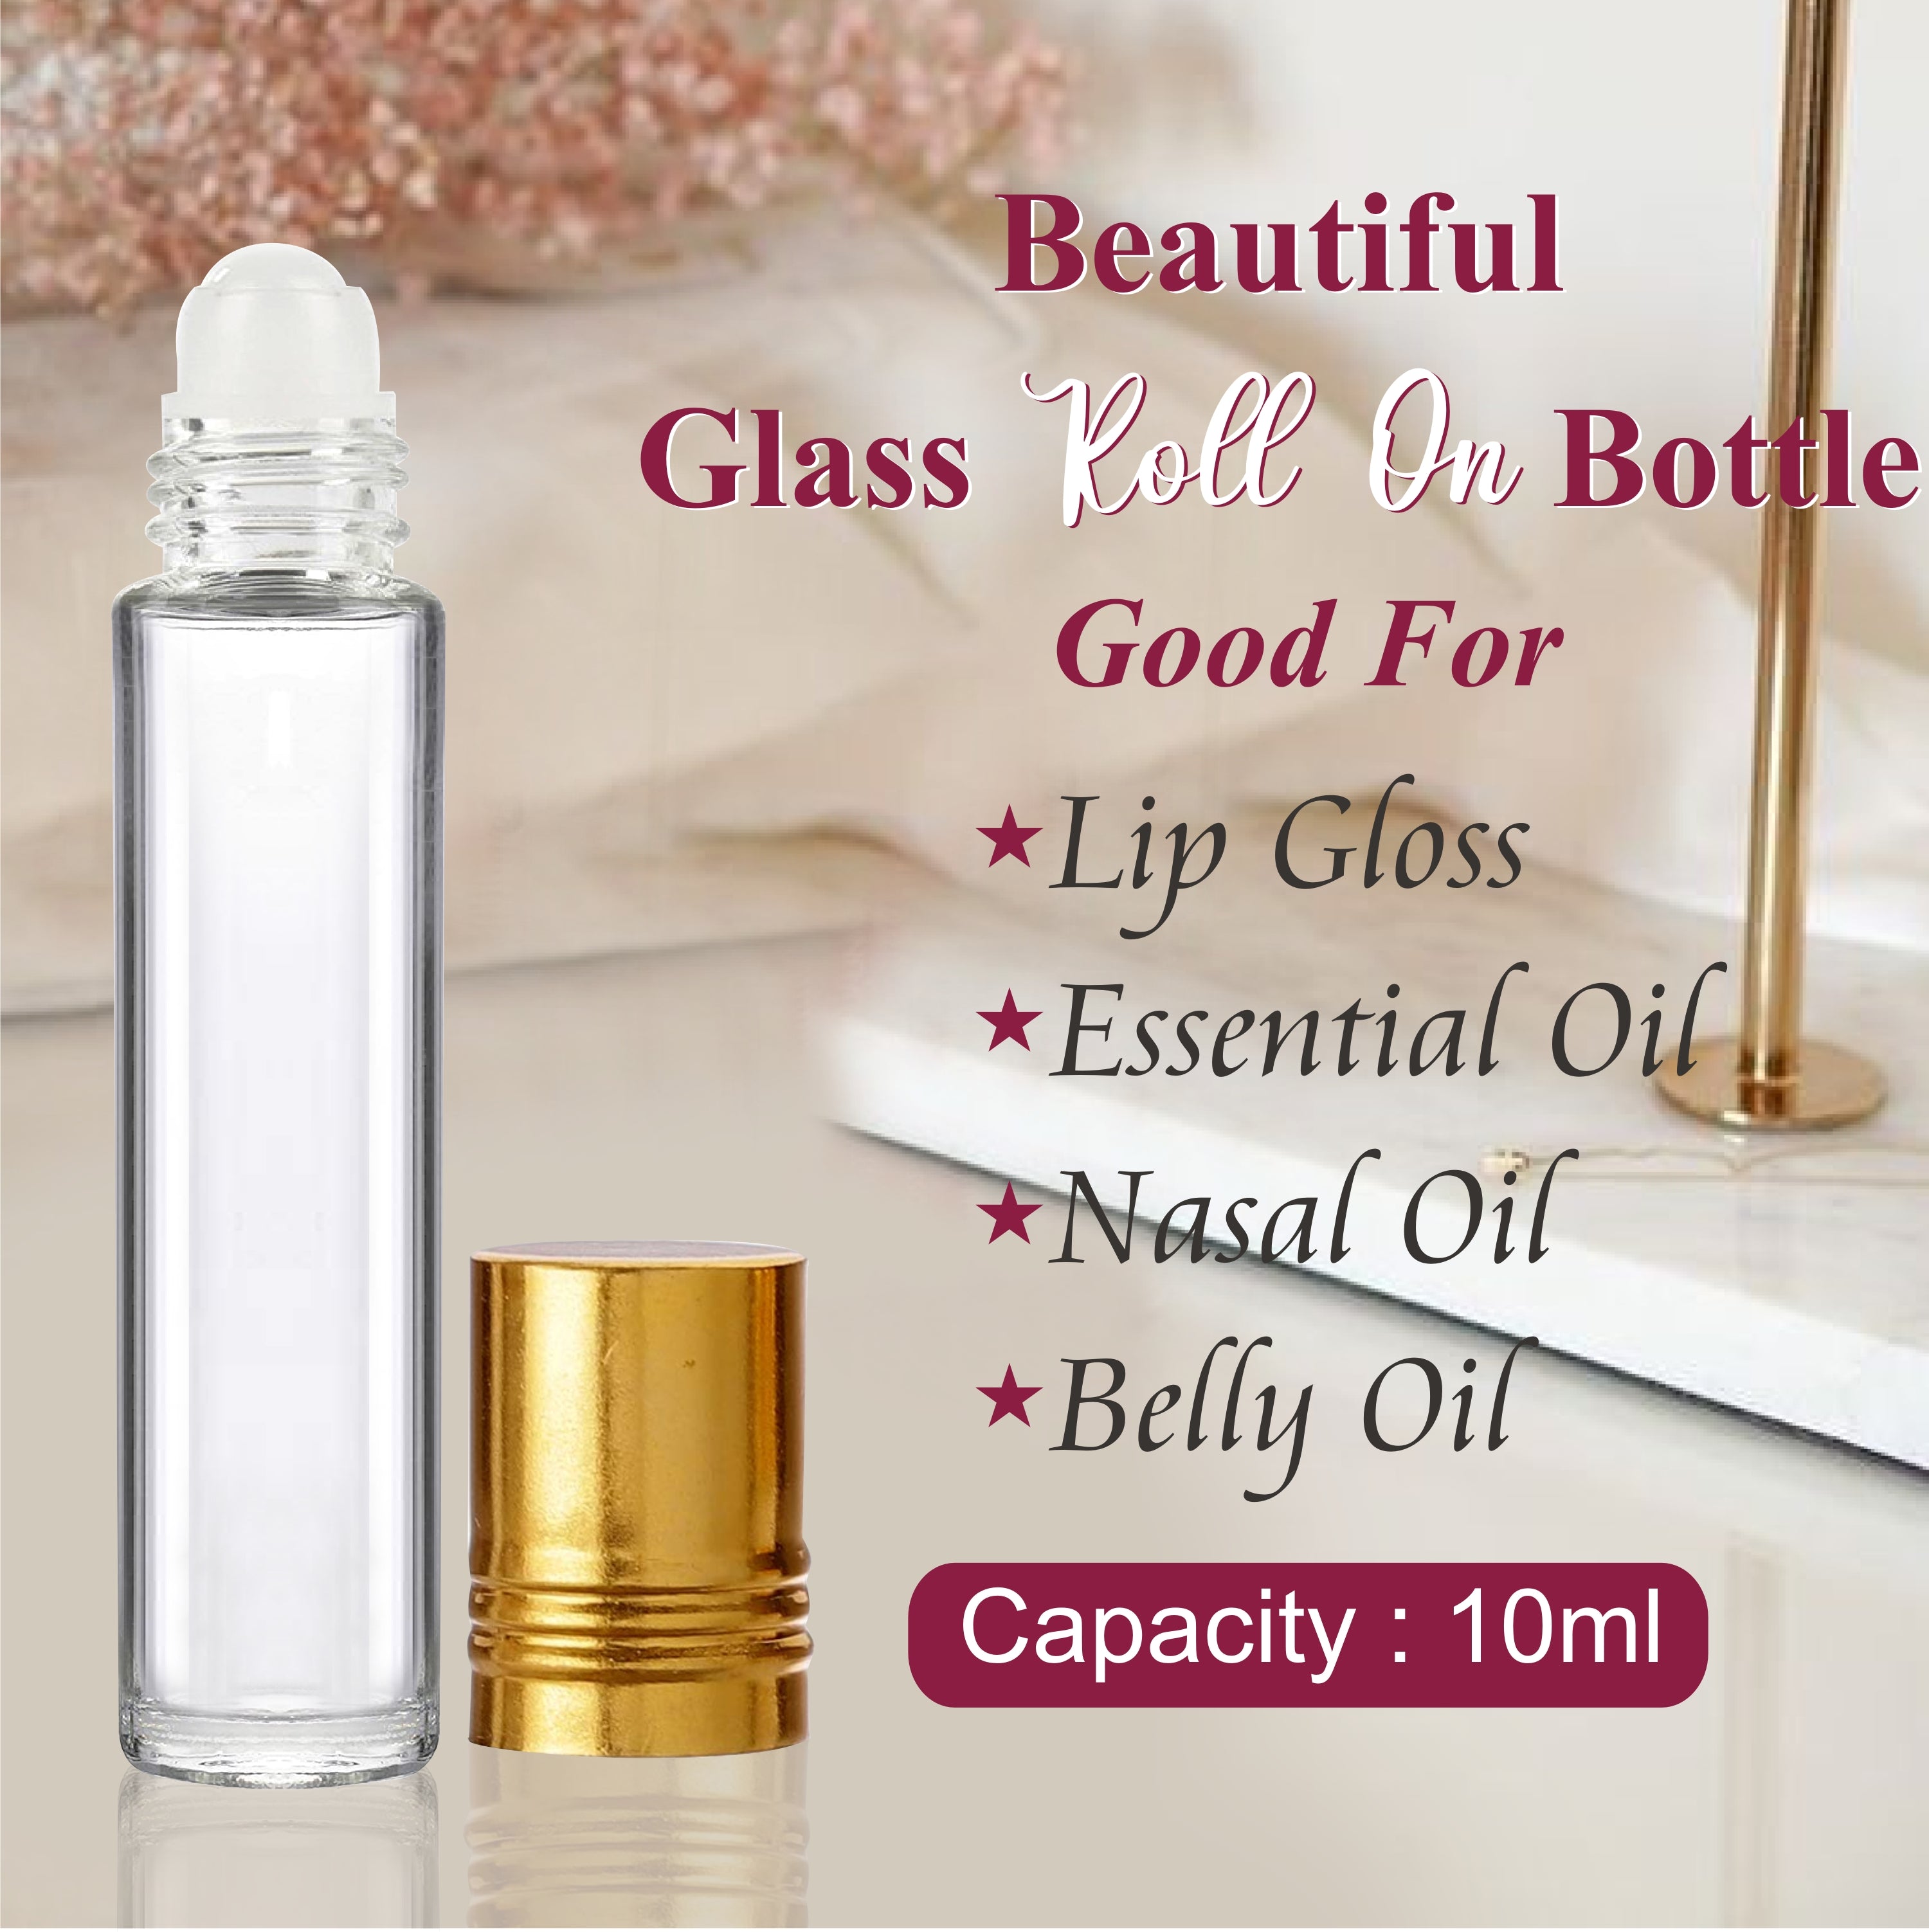 Cosmetic Glass Roll on Bottle with Beautiful Golden Cap - 10ml [ZMG24]